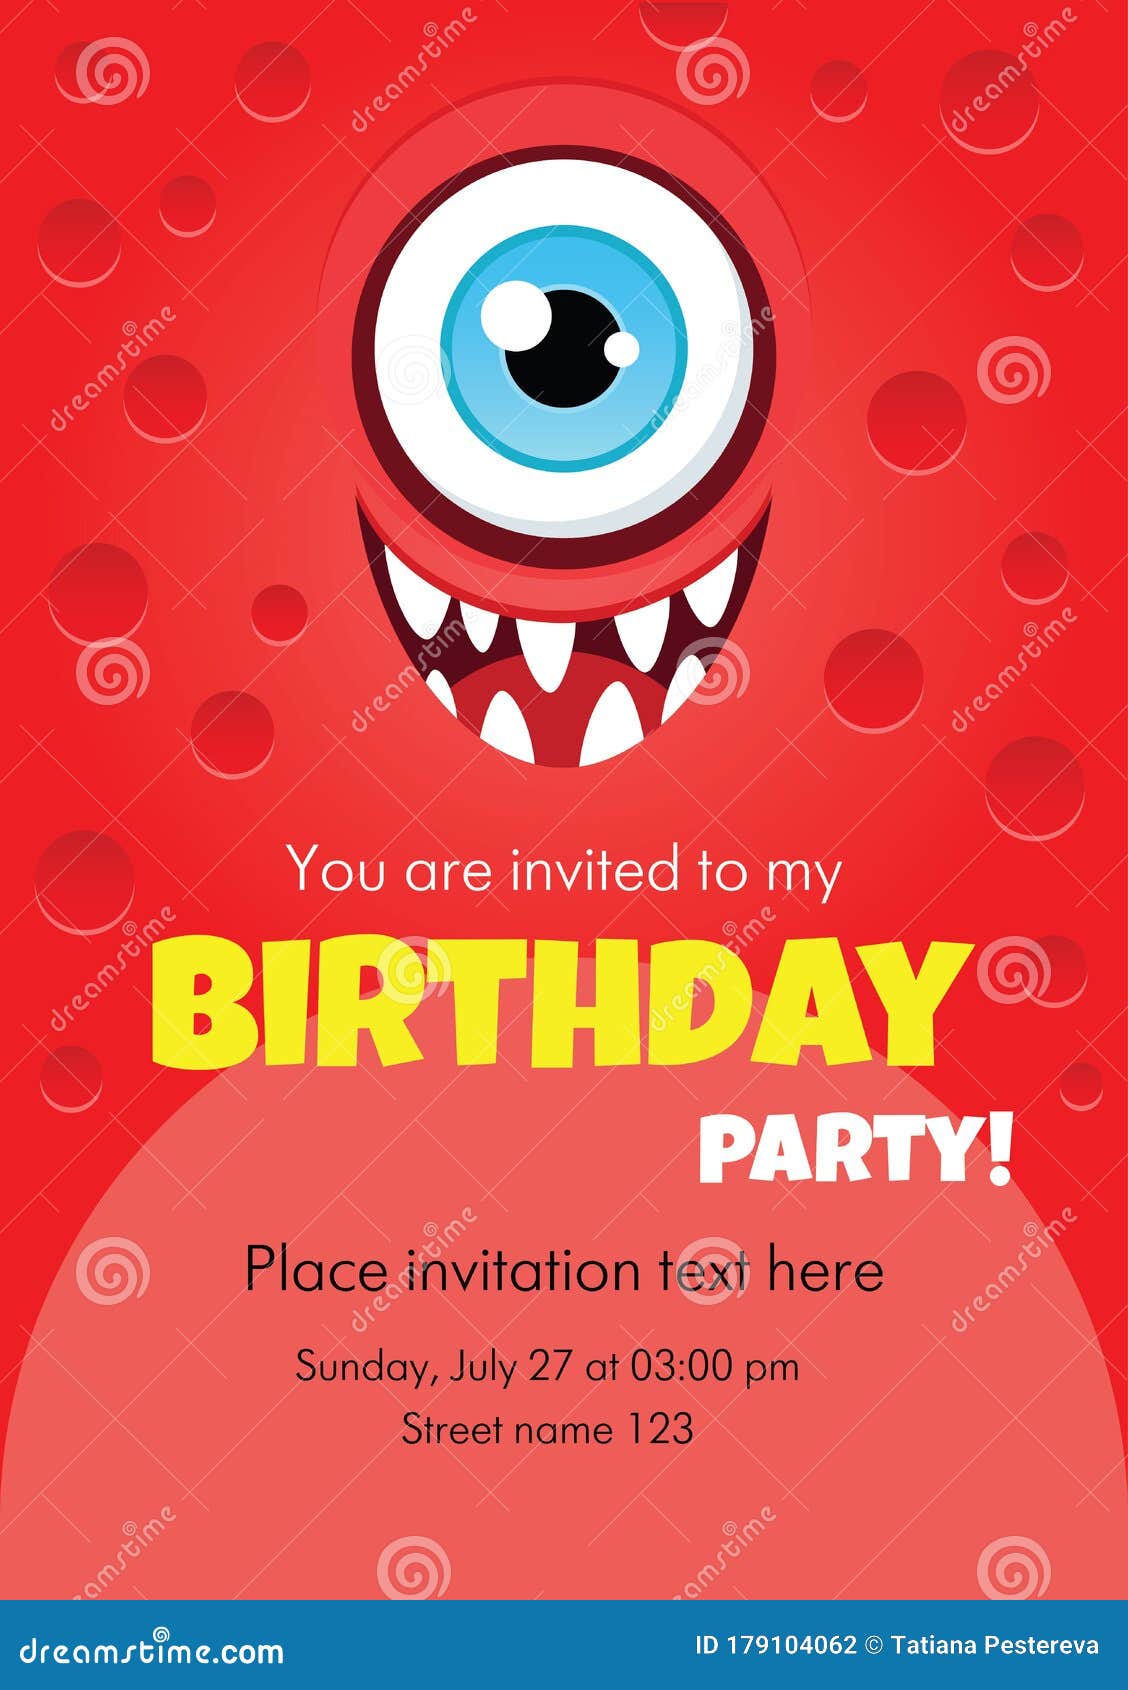 Birthday Party Invitation Template Stock Vector Illustration Of Creature Card